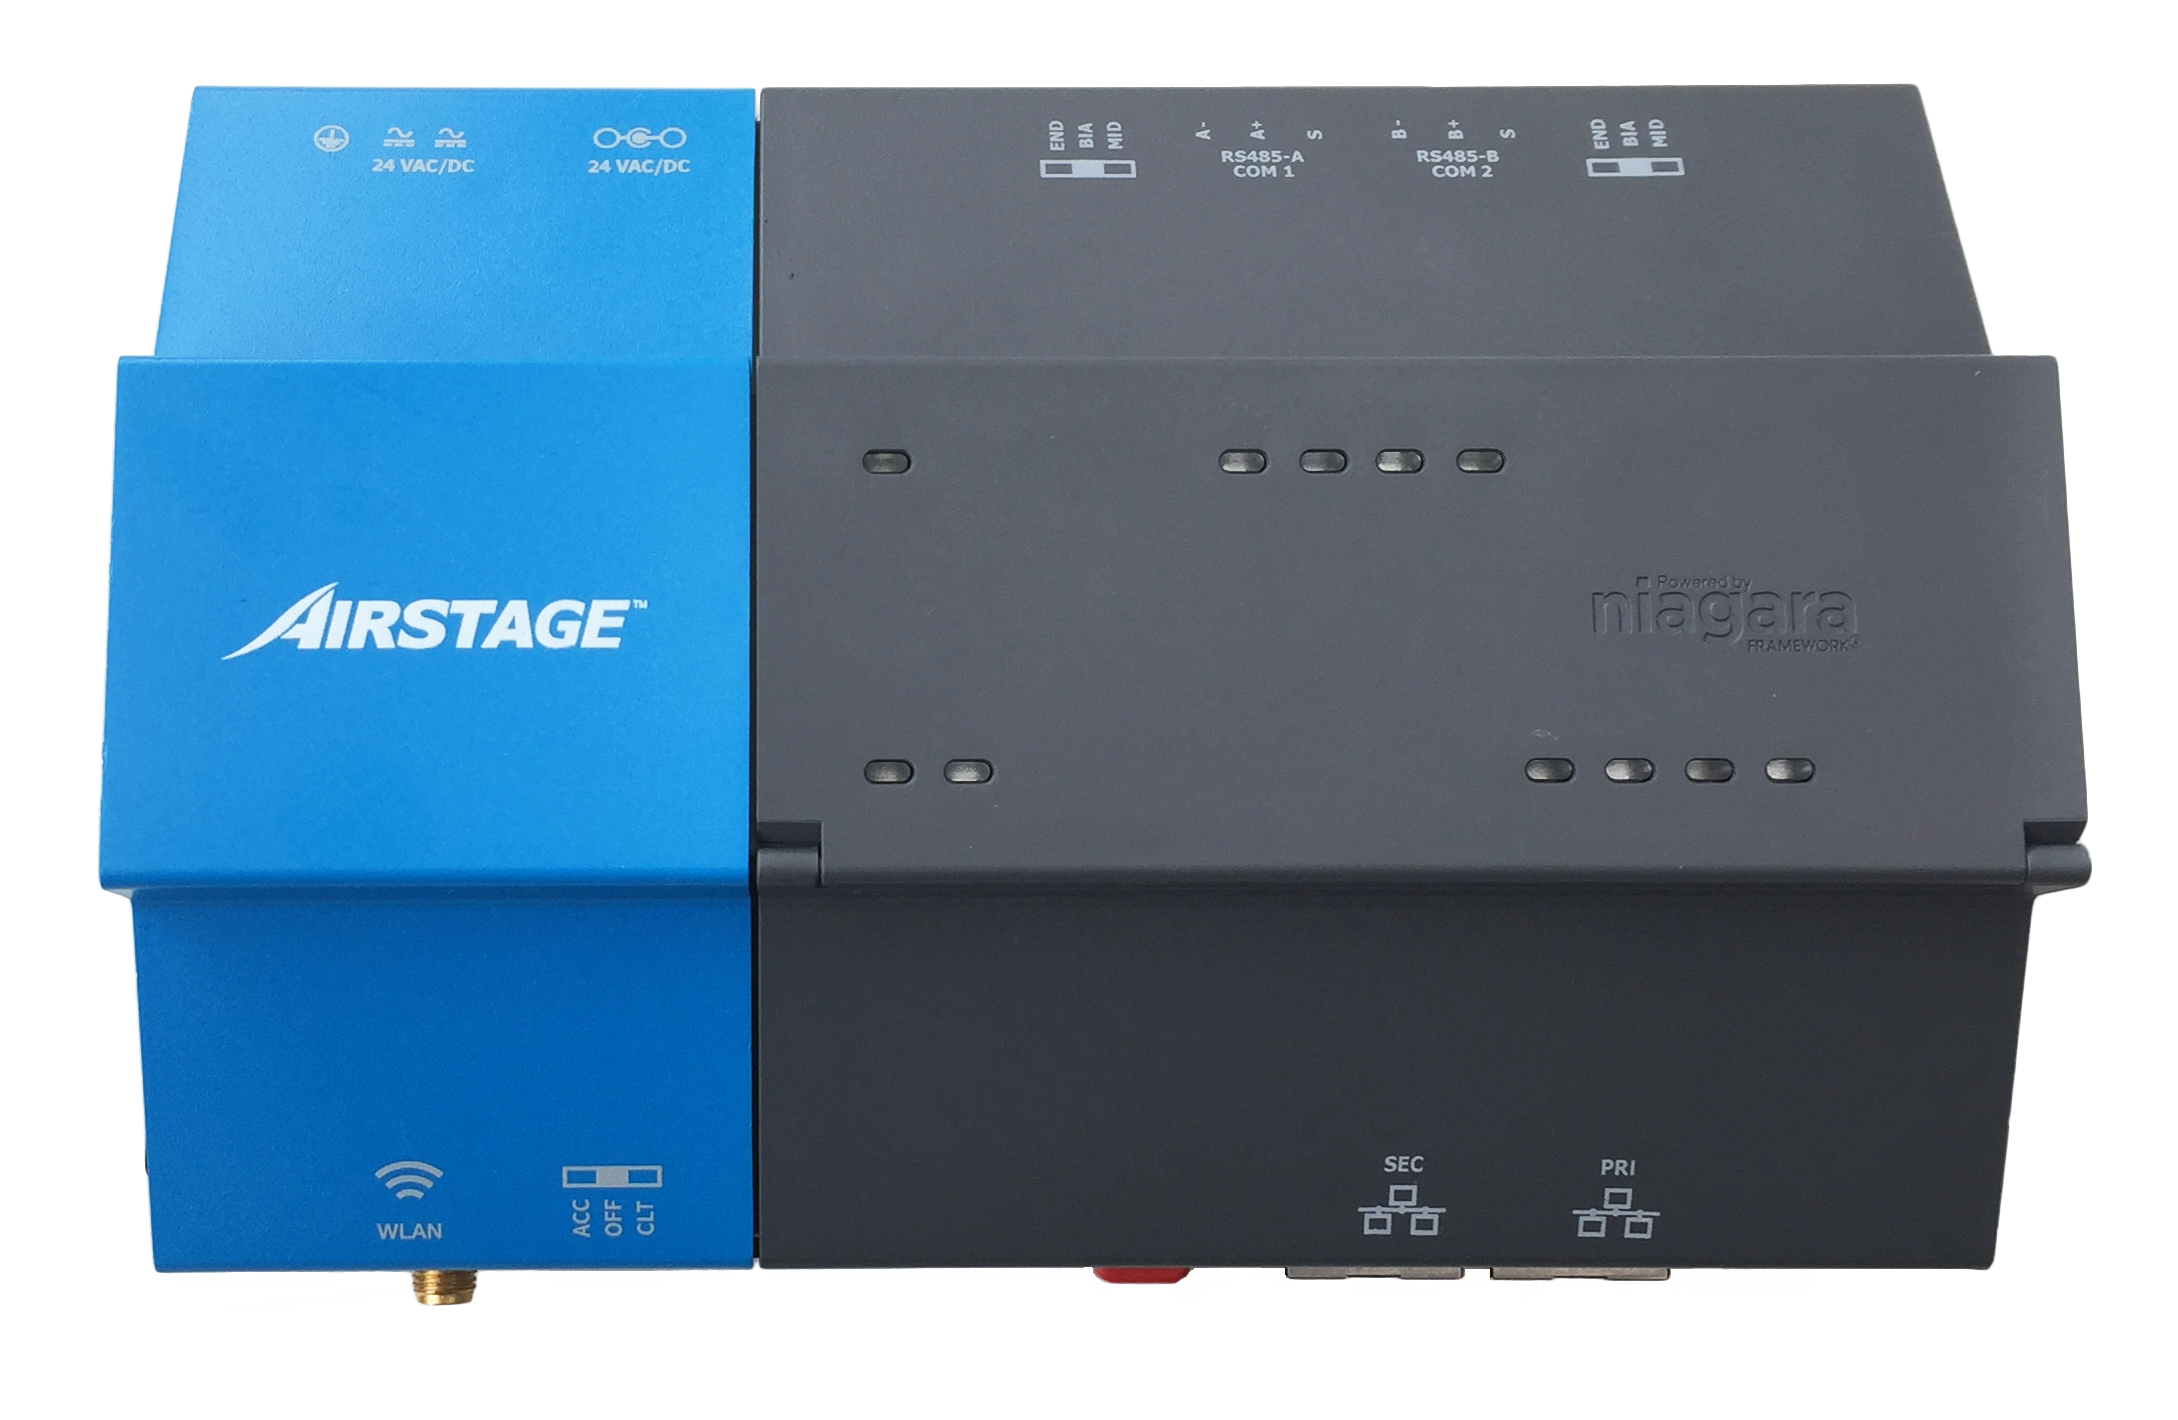 Fujitsu Airstage Integration Manager controller